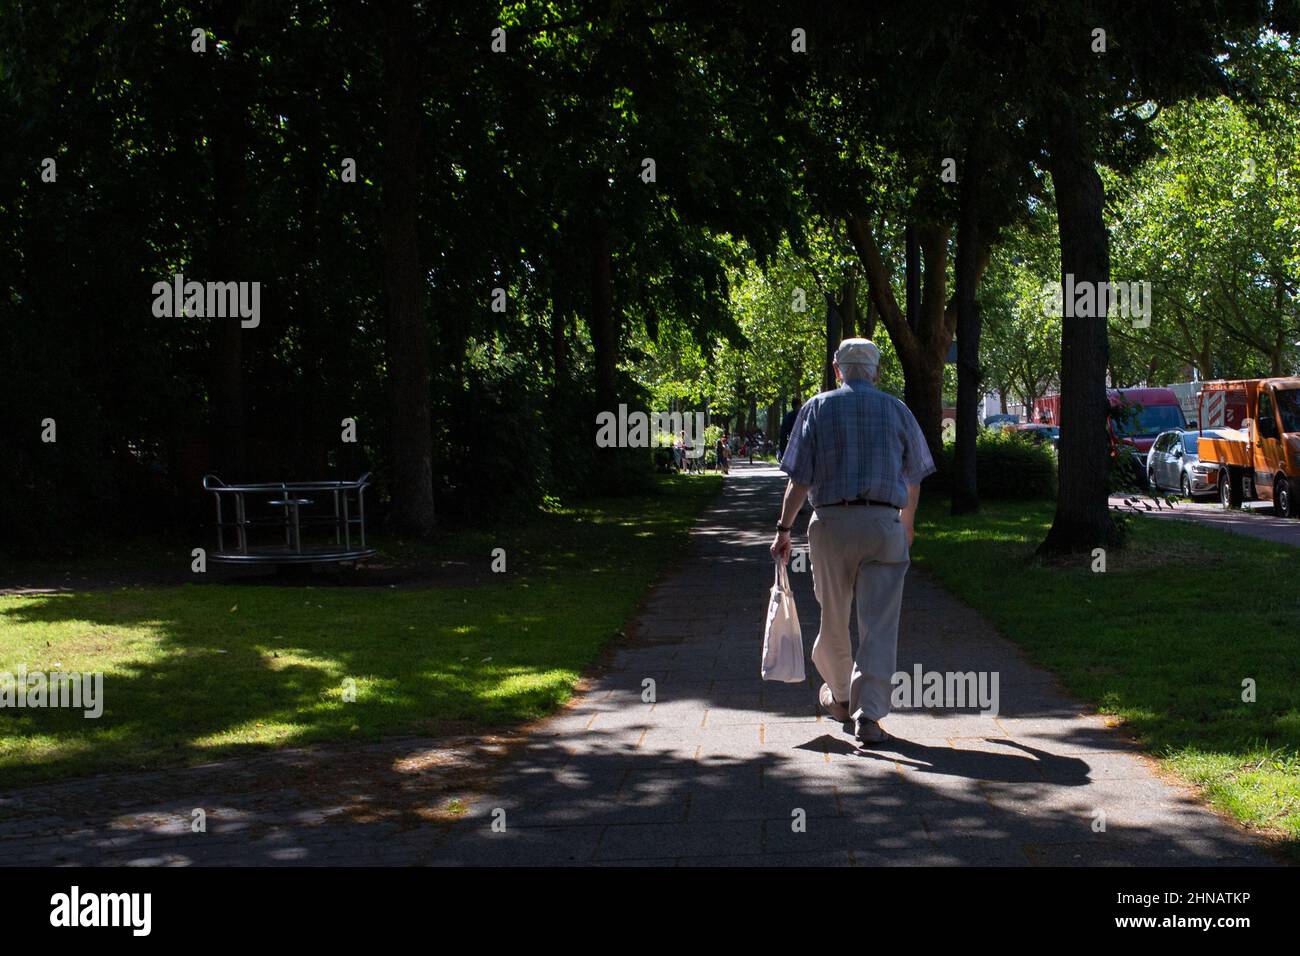 Elderly man walking down a sunlit path between trees in a park Stock Photo